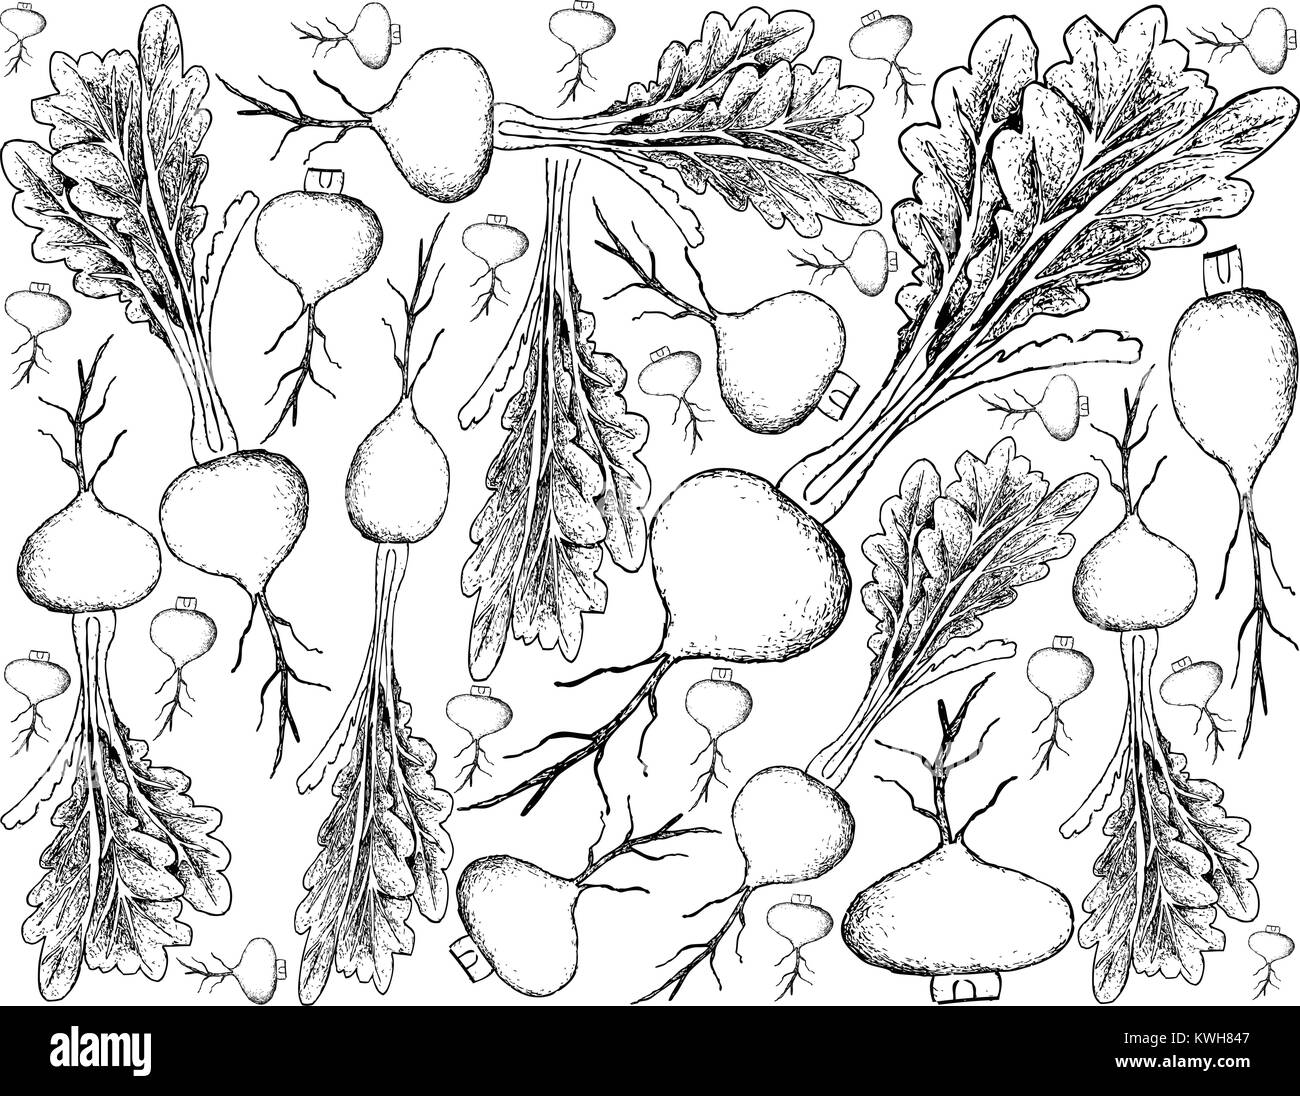 Root and Tuberous Vegetables, Illustration Hand Drawn Sketch of Fresh Prairie Turnip or Psoralea Esculenta Plants Isolated on White Background. Stock Vector